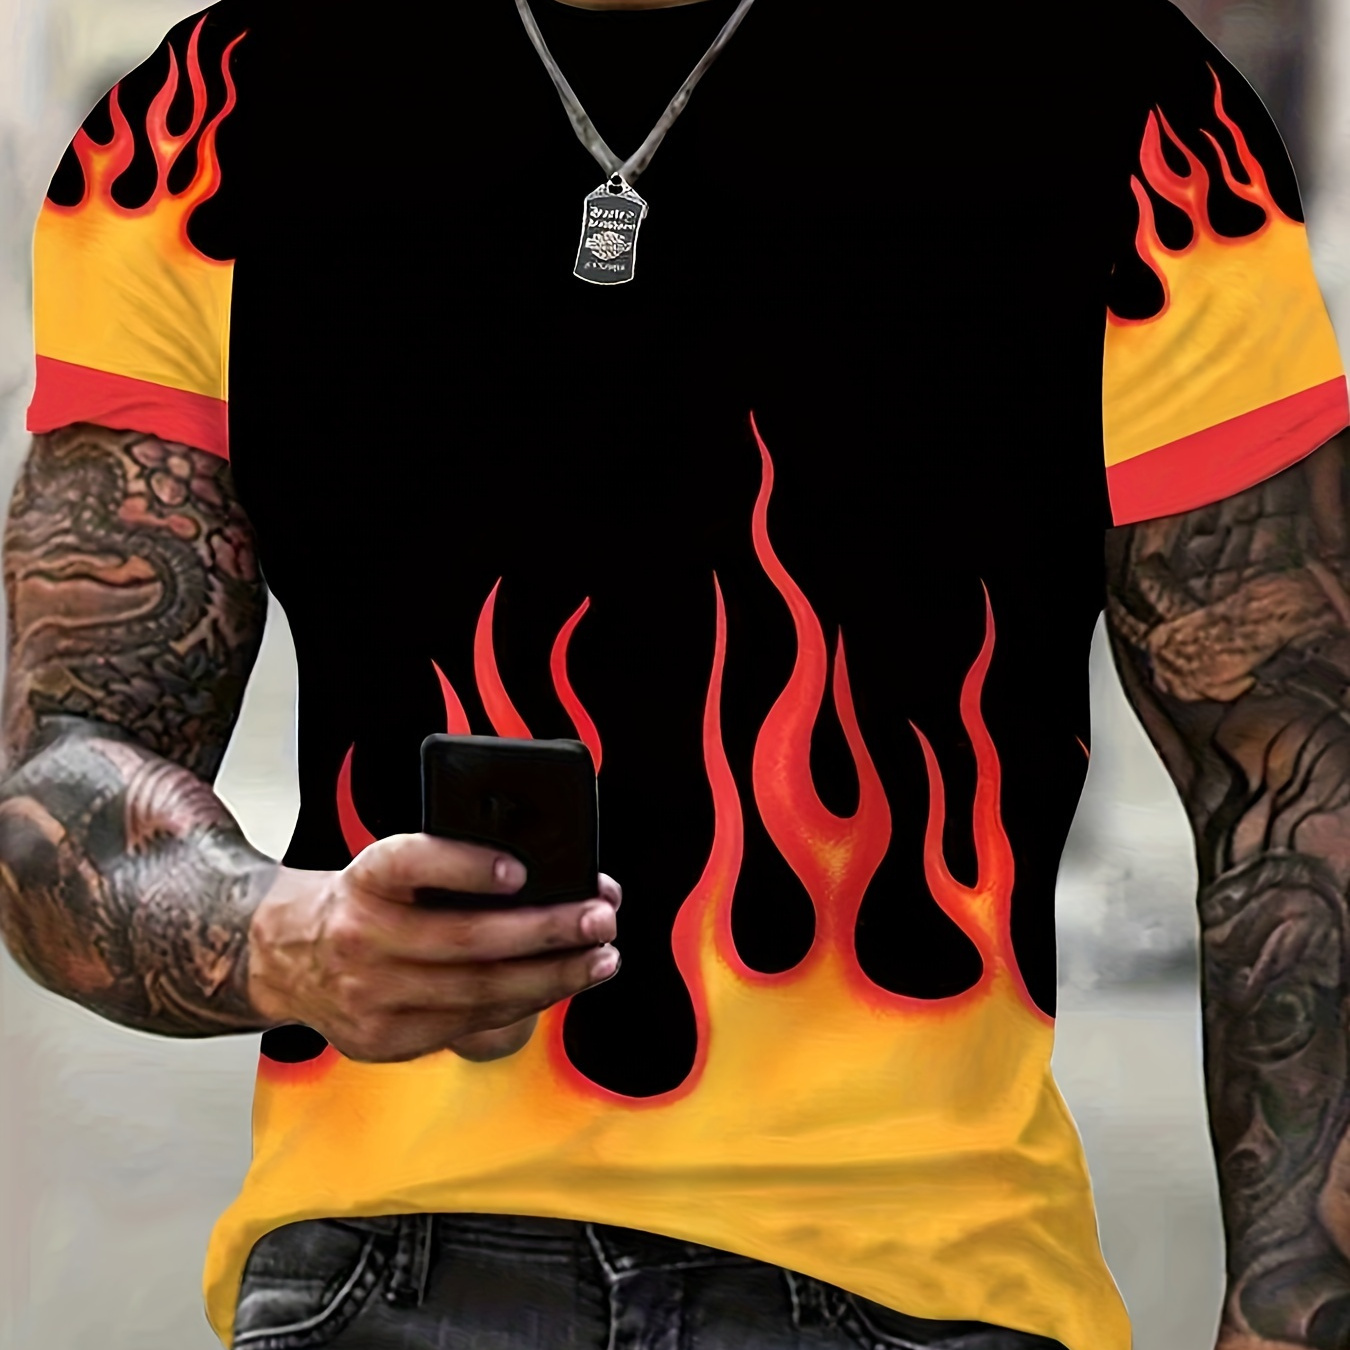 

Men's Casual Crew Neck Graphic T-shirt With Fancy Flame Print, Trendy Short Sleeve Top For Summer Daily Wear